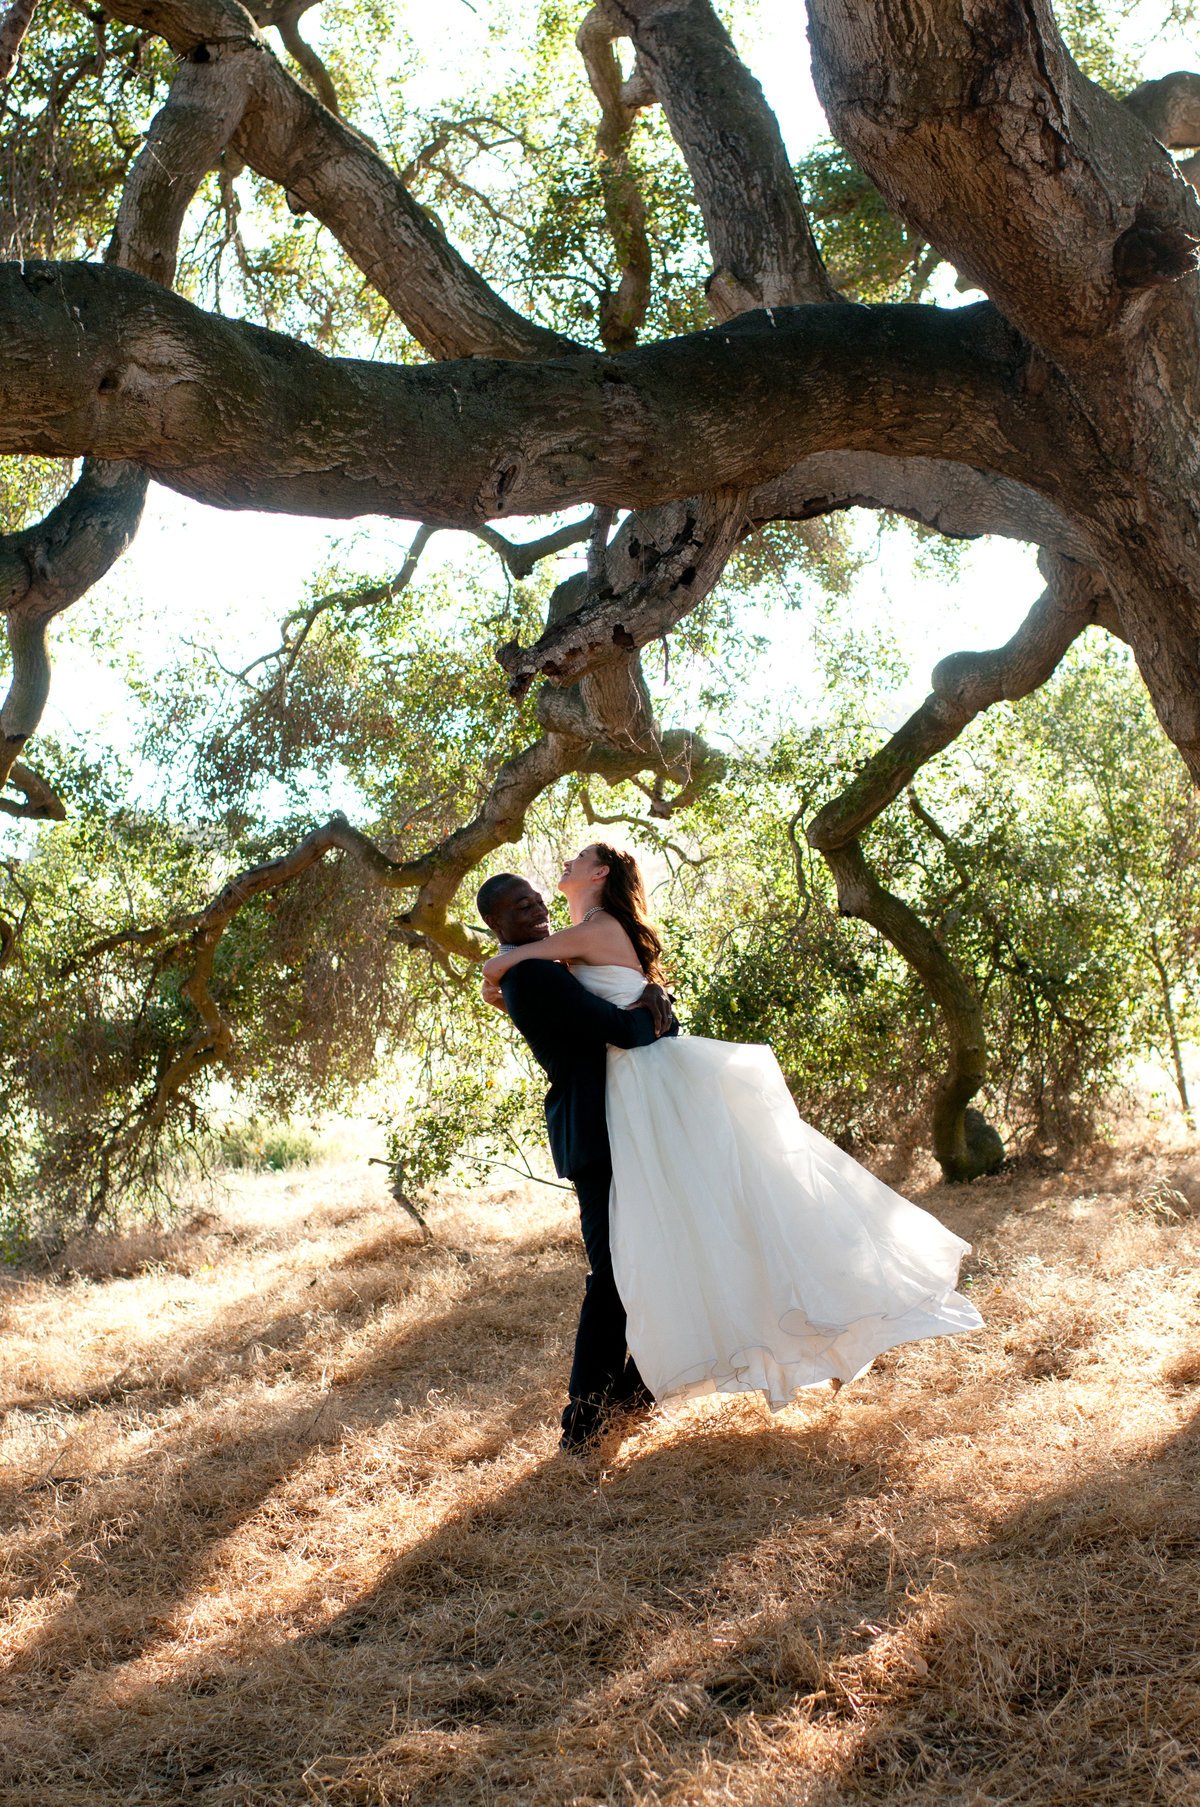 Orange County Photographer for the sophisticated sweethearts, Romantic Mountain photographer for the romantic brides, Fun wedding photo in the mountains.